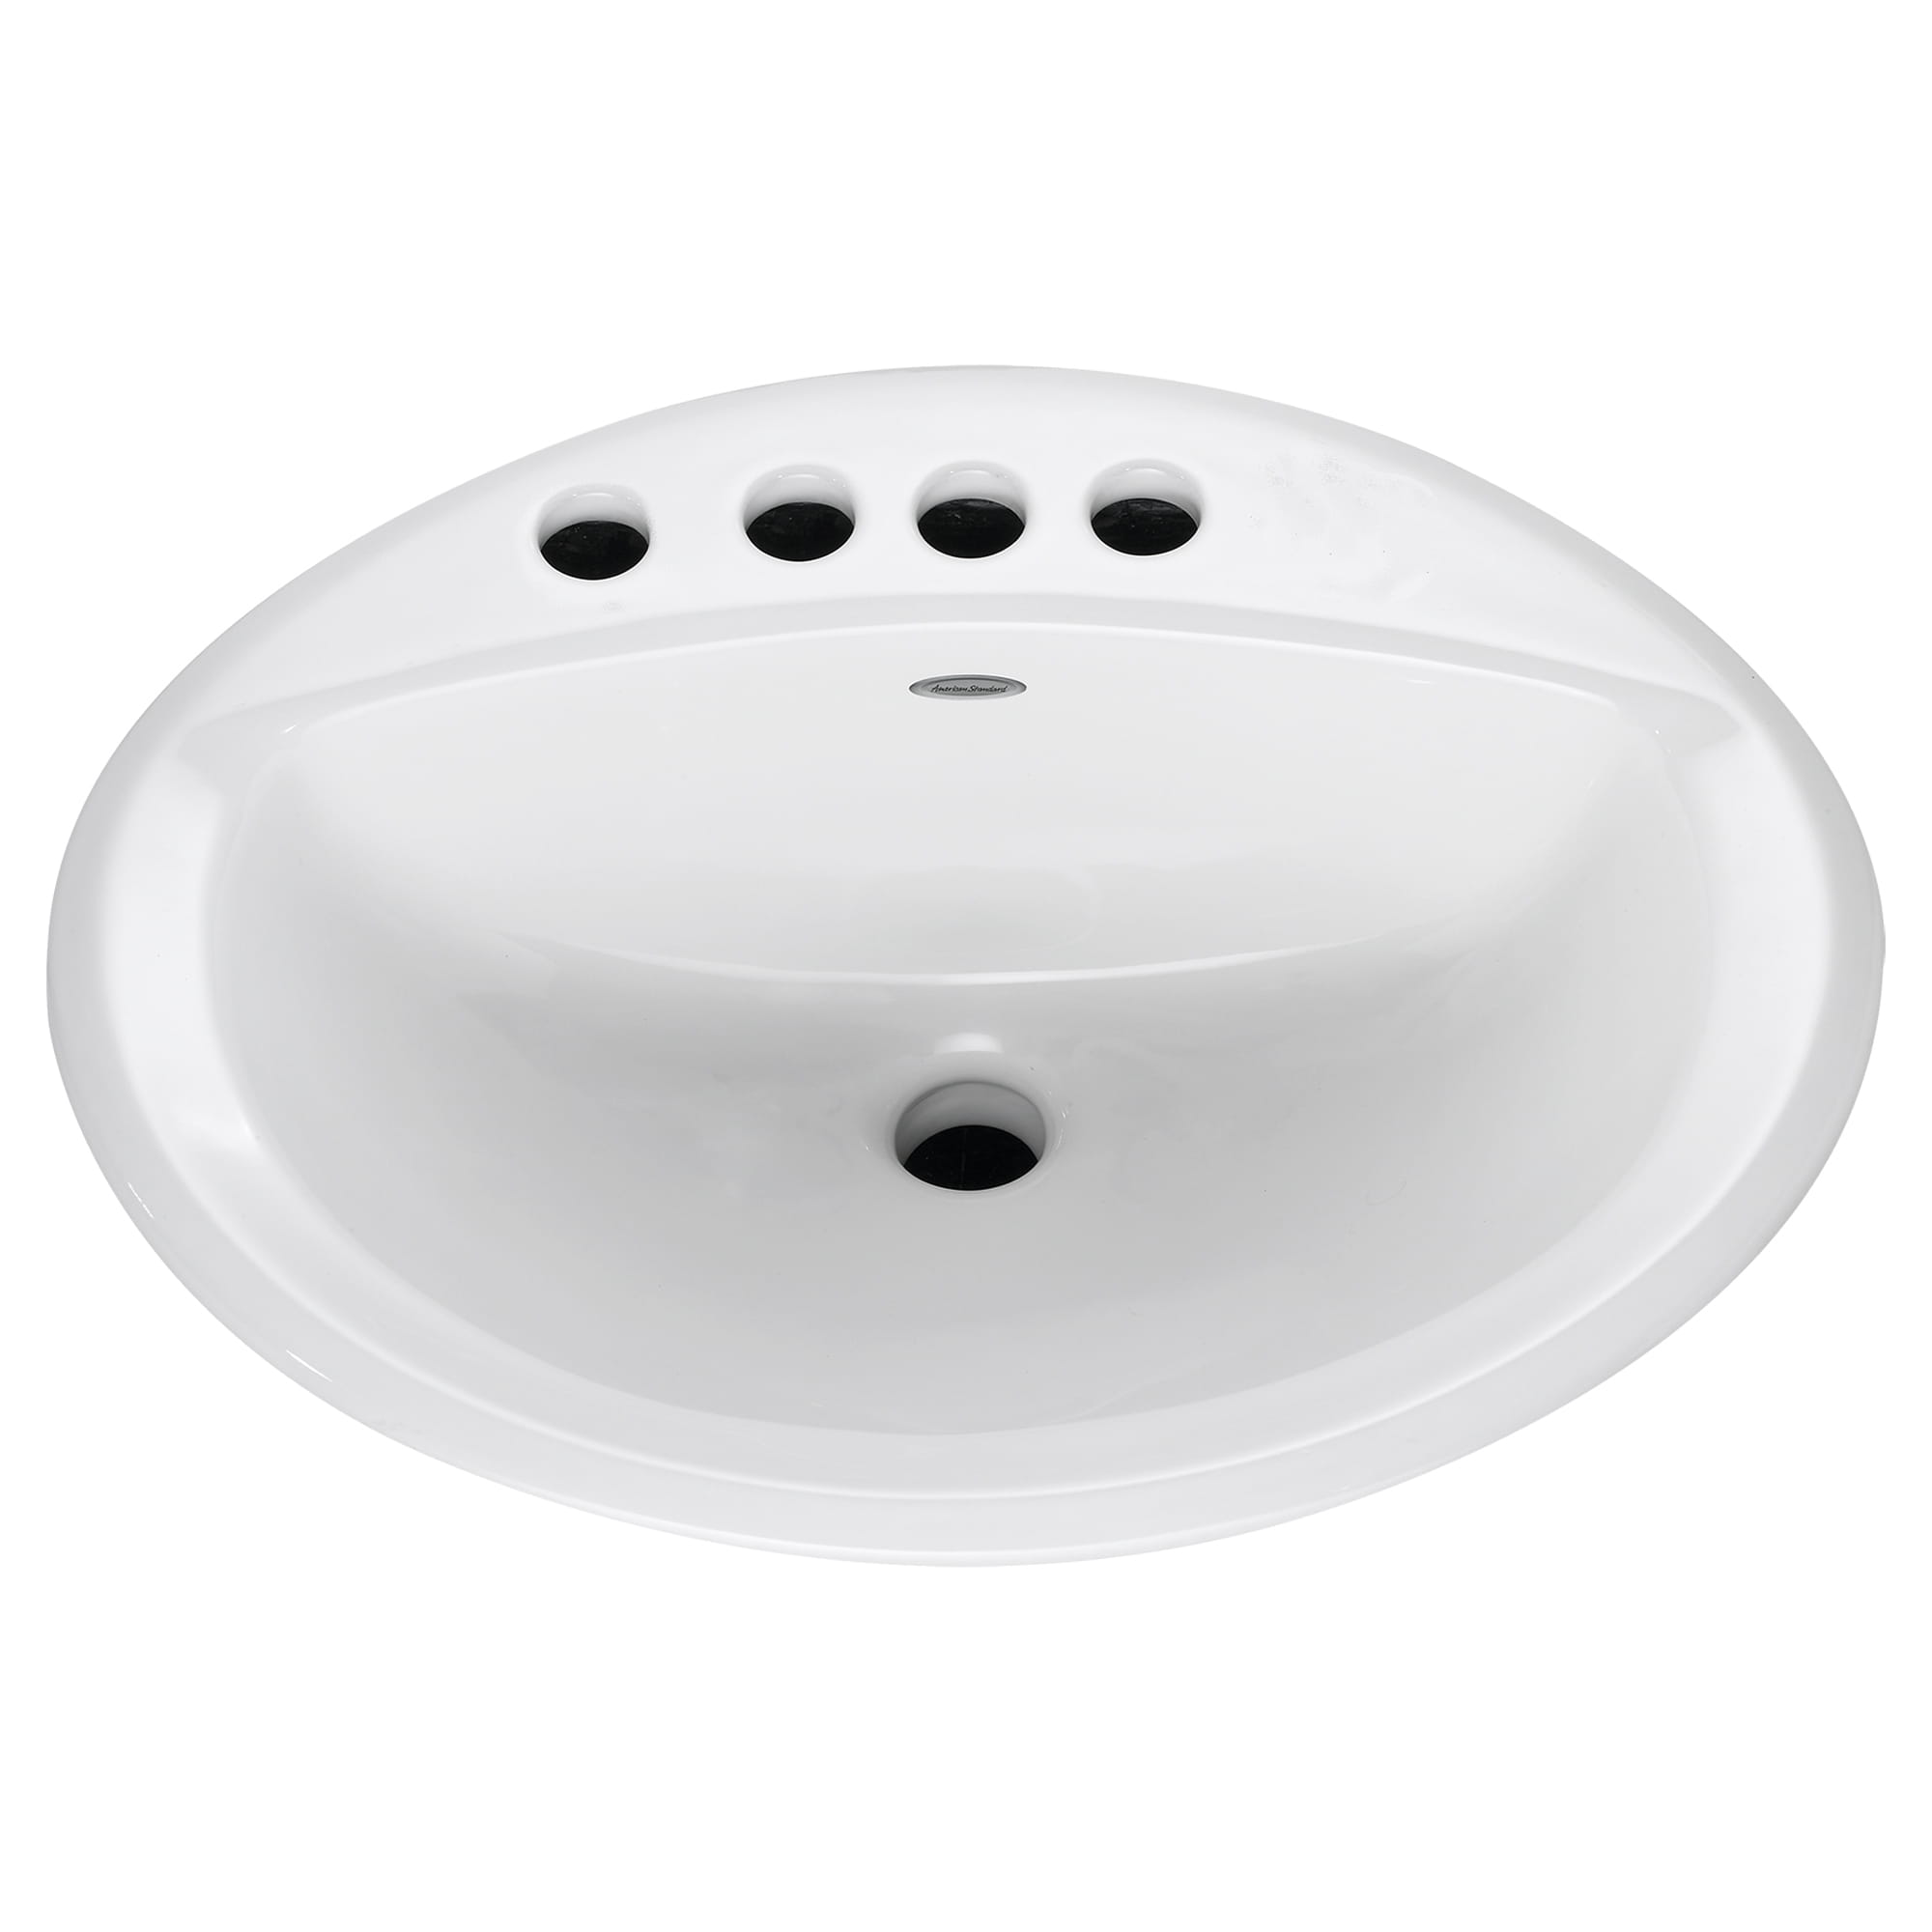 Aqualyn® Drop-In Sink With 4-Inch Centerset and Extra Left-Hand Hole